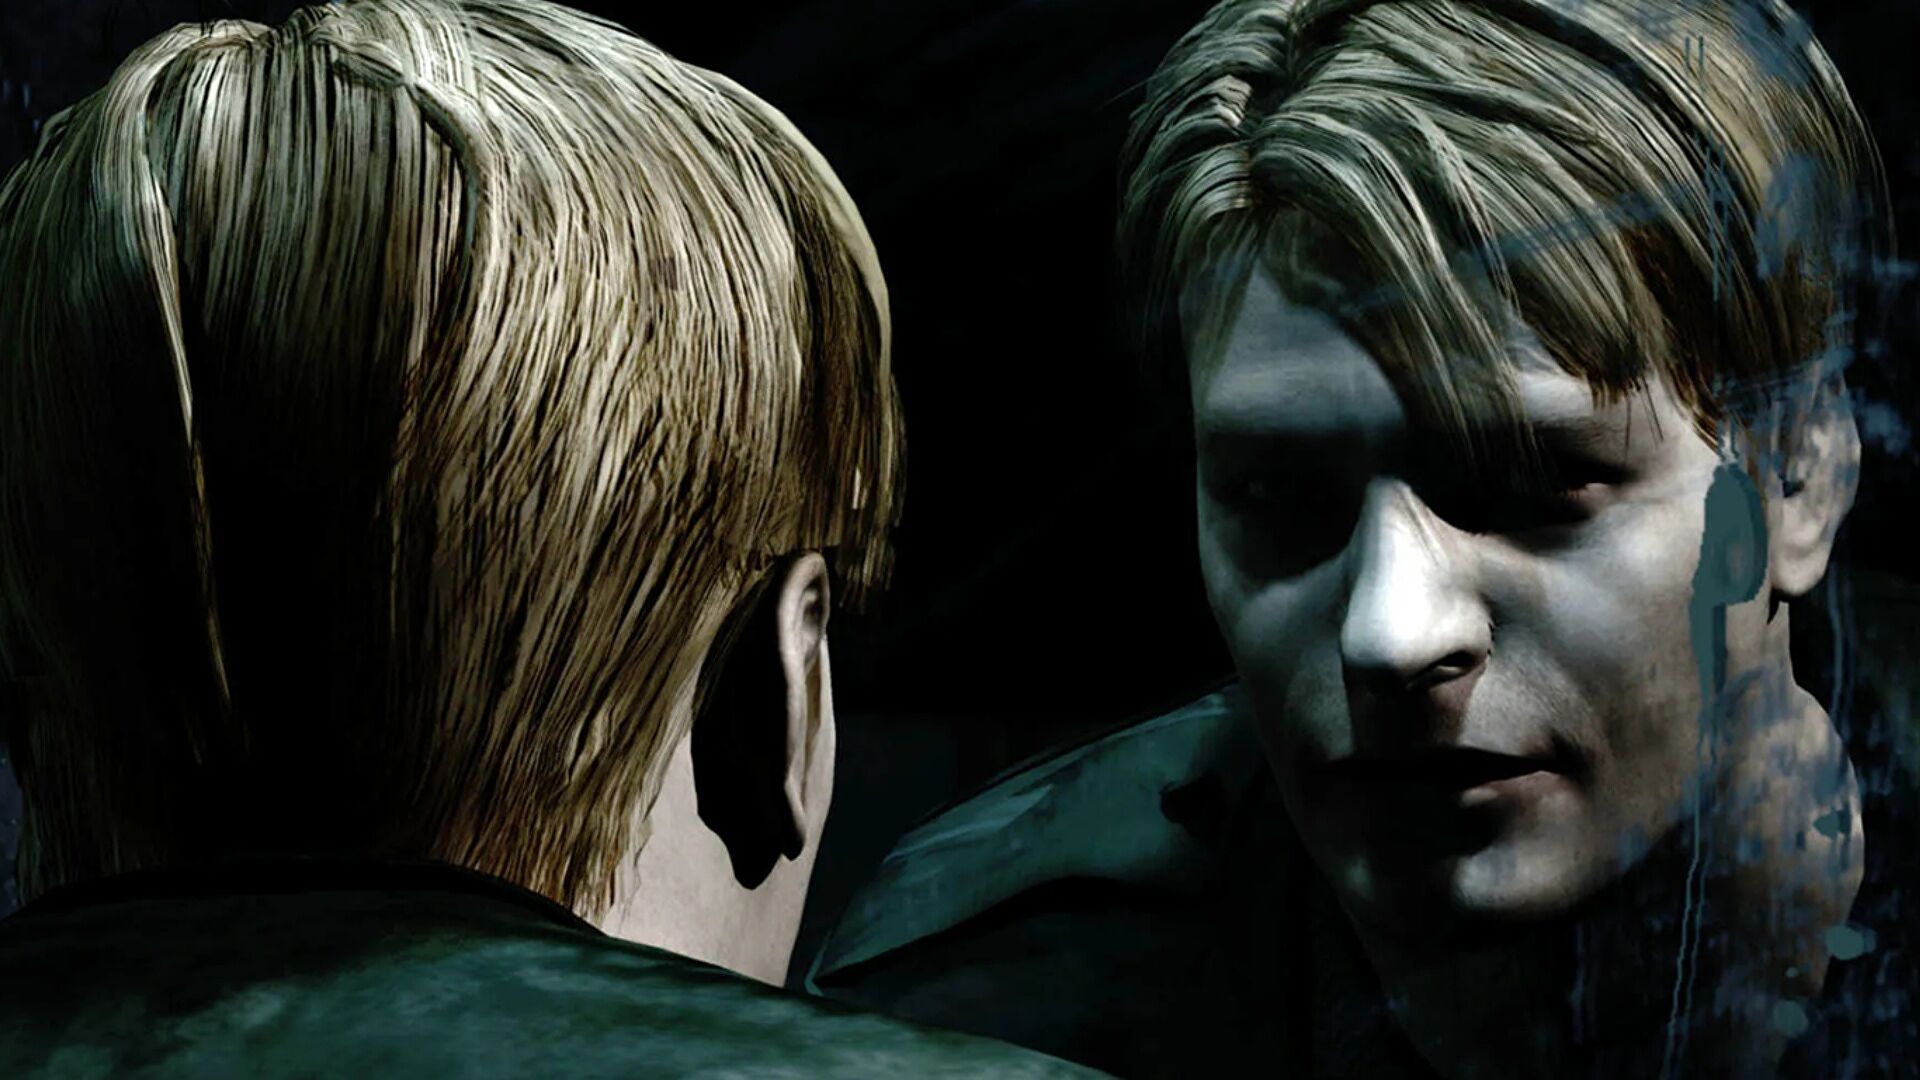 Konami leak their own Silent Hill reveal ahead of today’s stream